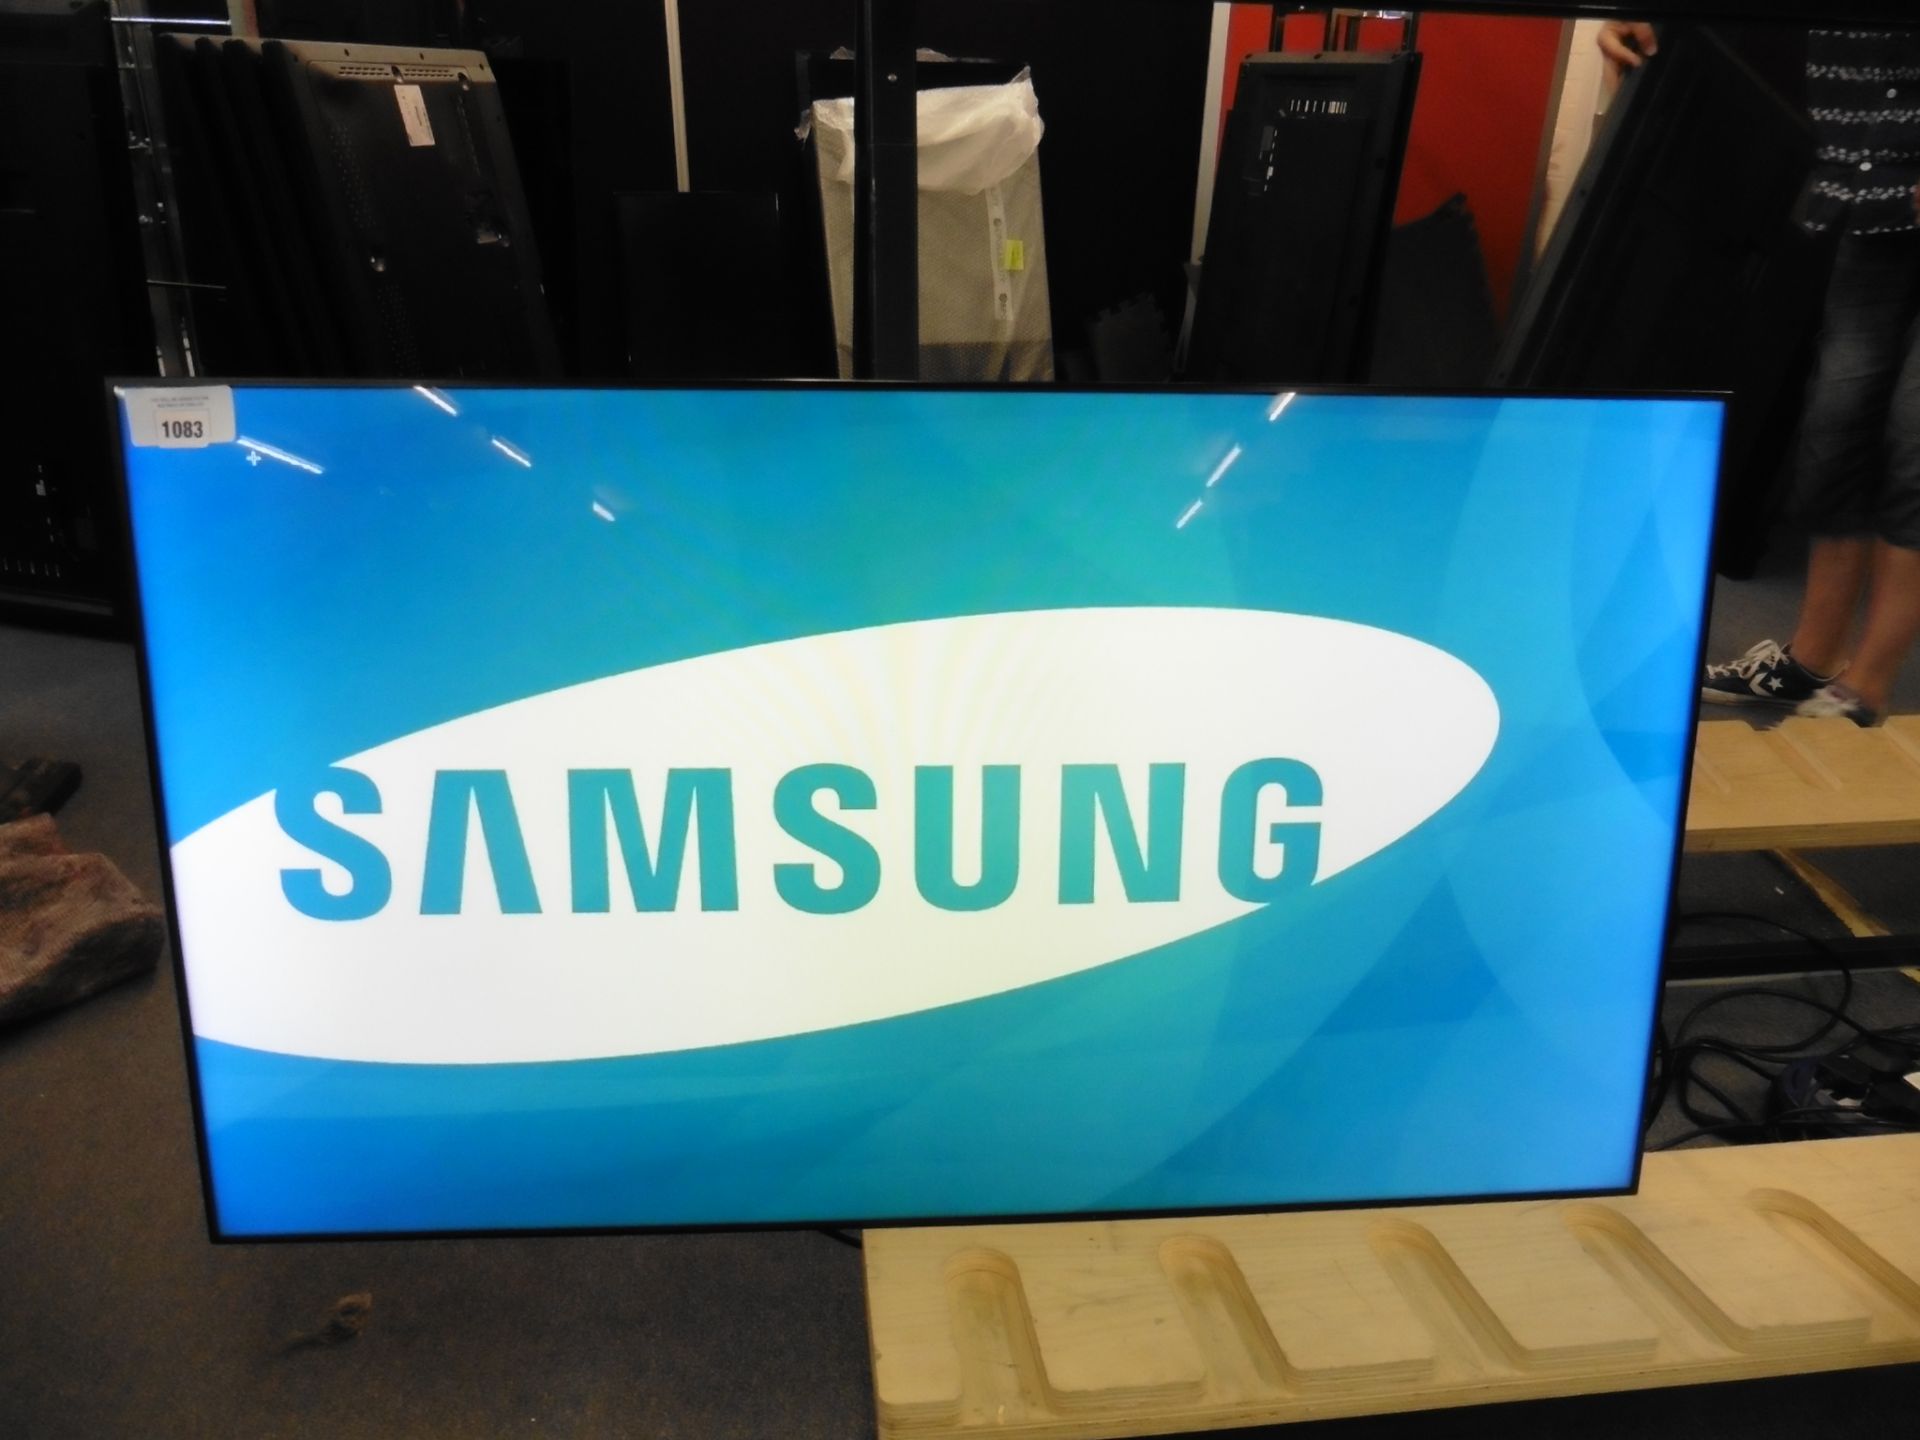 Samsung model UE46D colour display screen (manufactured 2014)